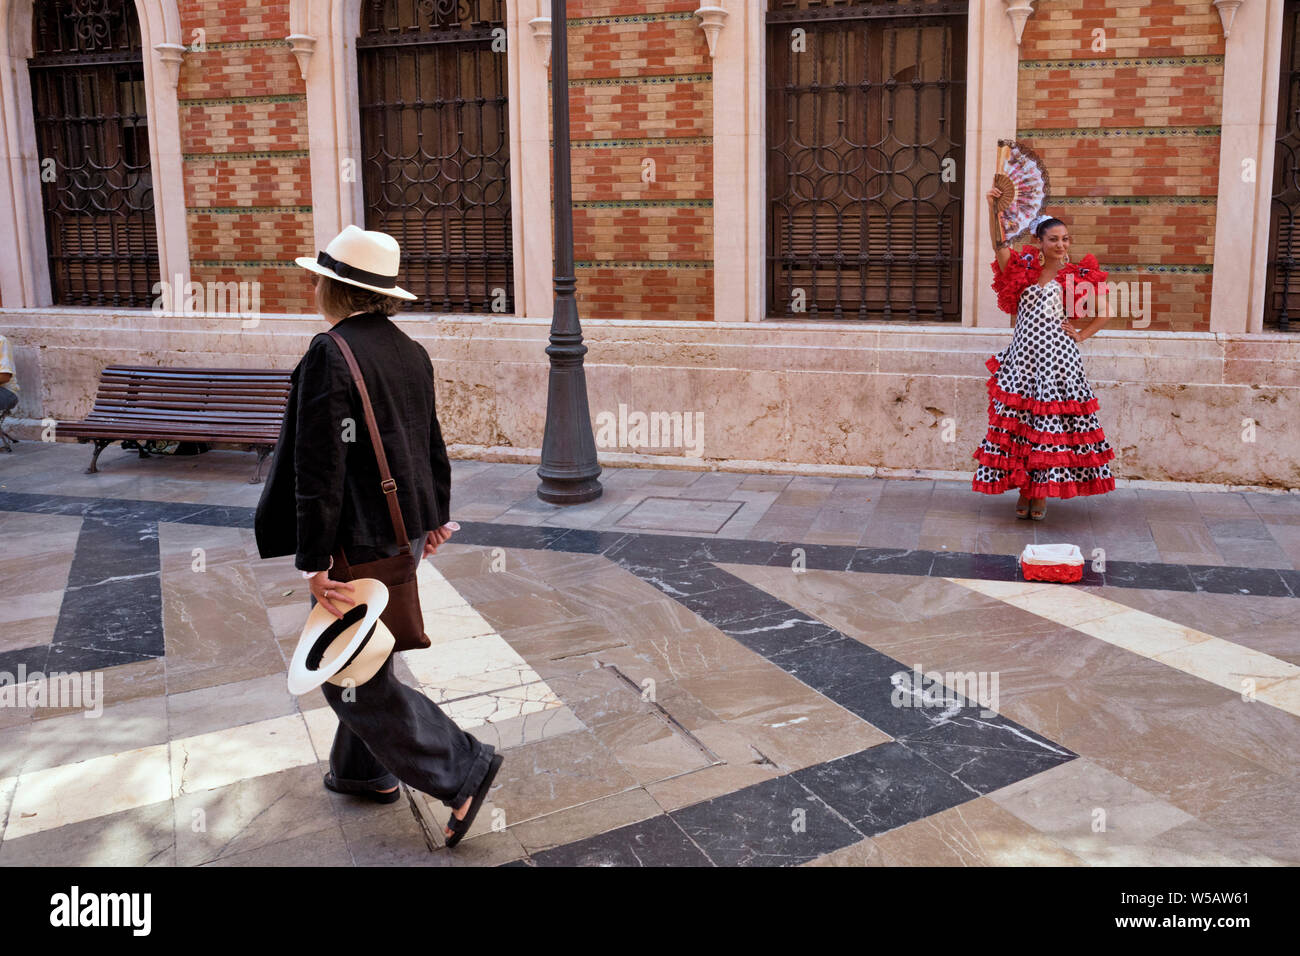 gypsy in costume and a tourist on a street in Malaga, Andalucia, Spain Stock Photo